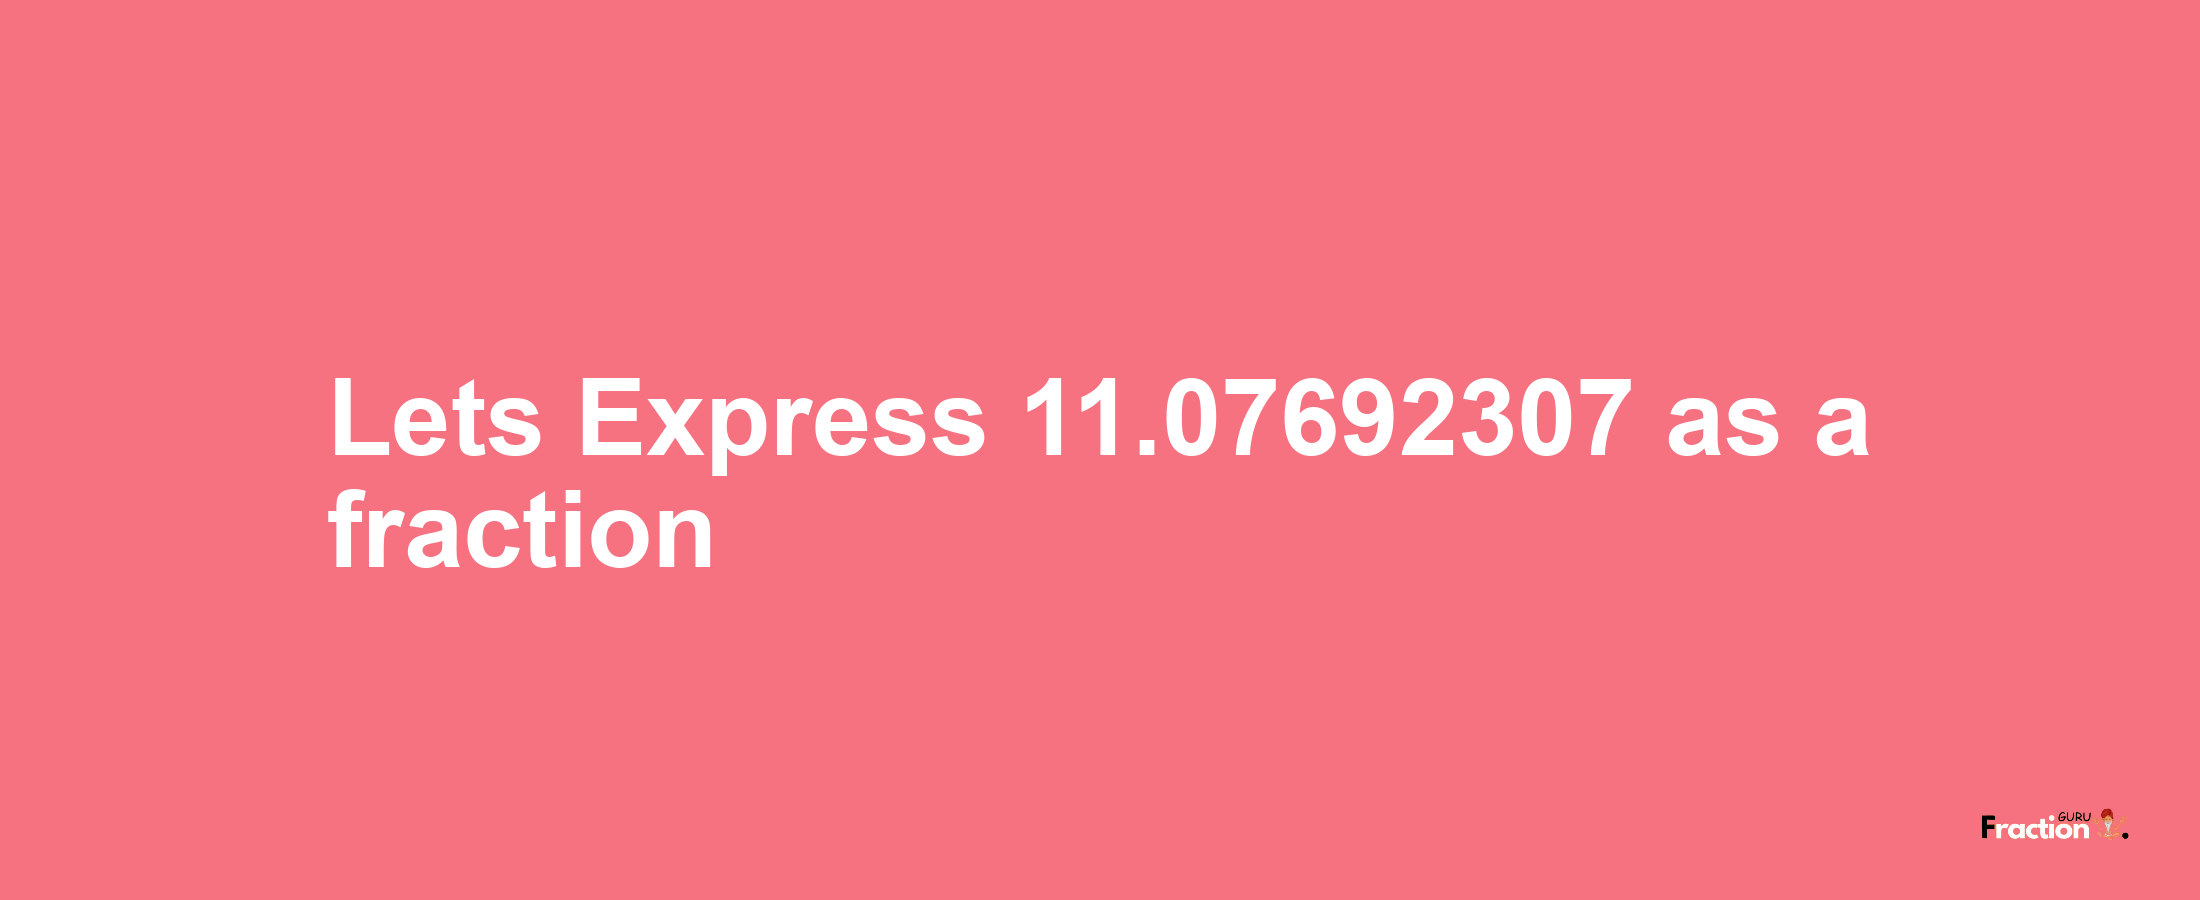 Lets Express 11.07692307 as afraction